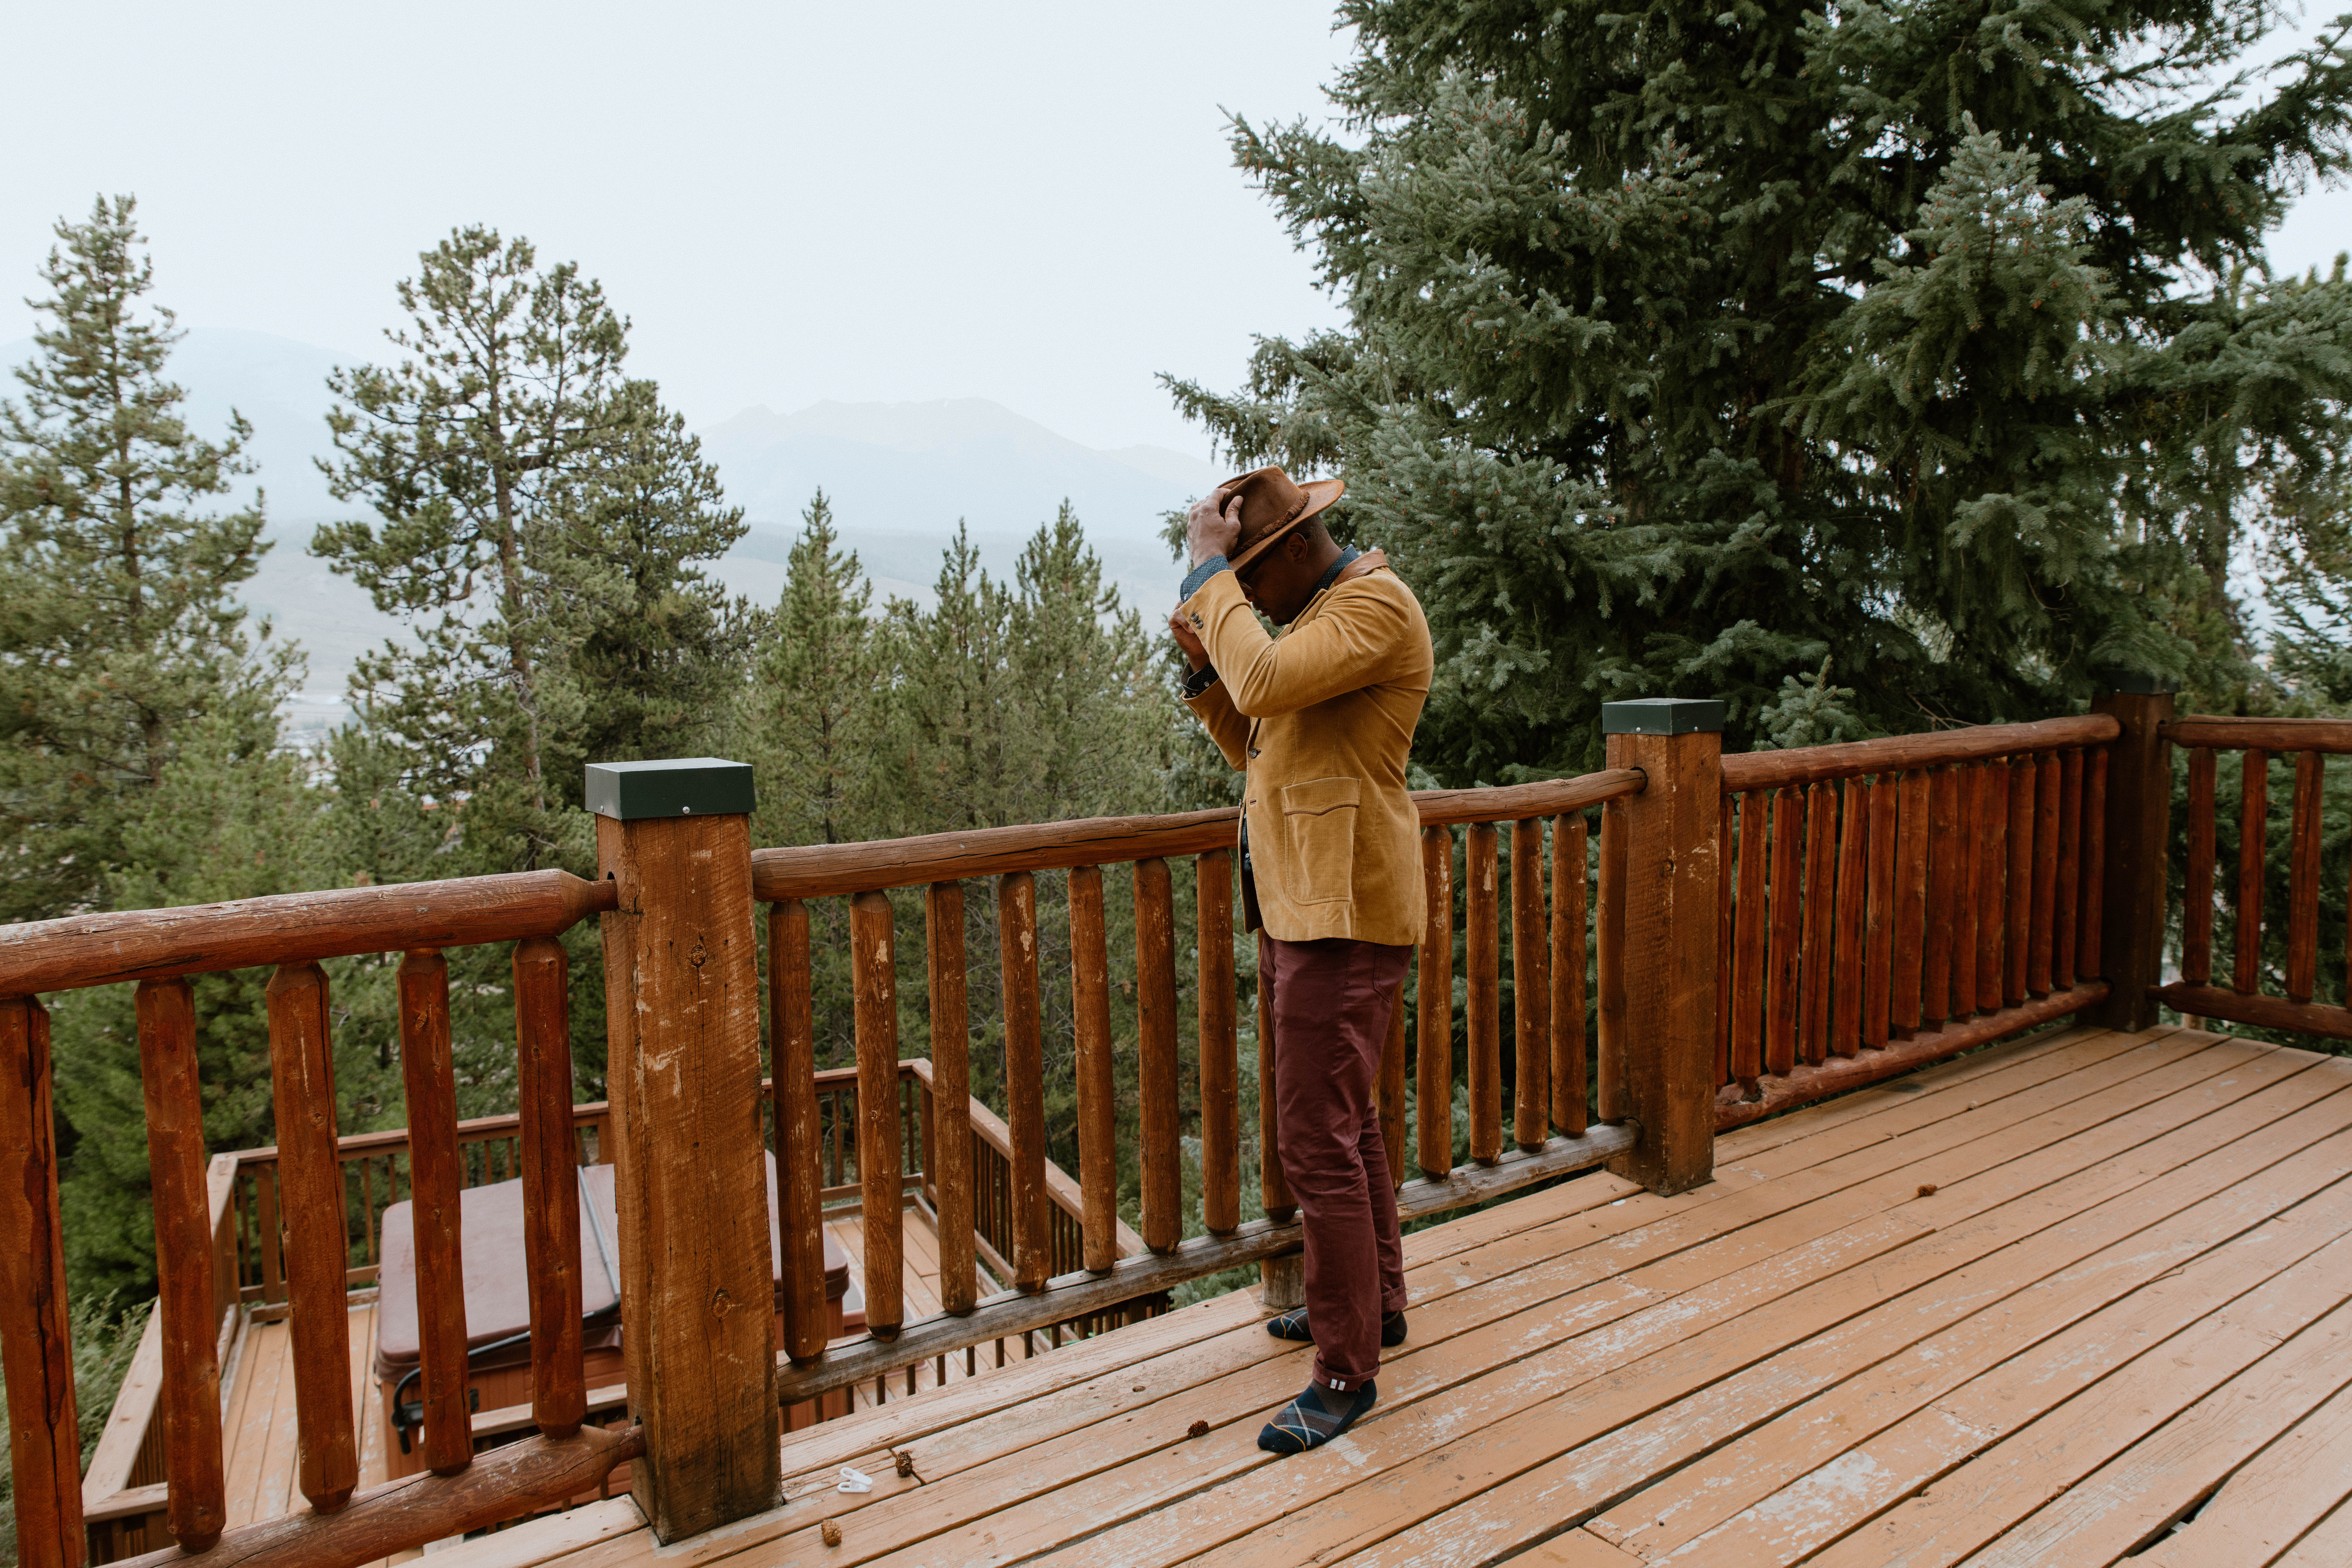 A man adjusts his hat while on a patio overlooking an evergreen forest